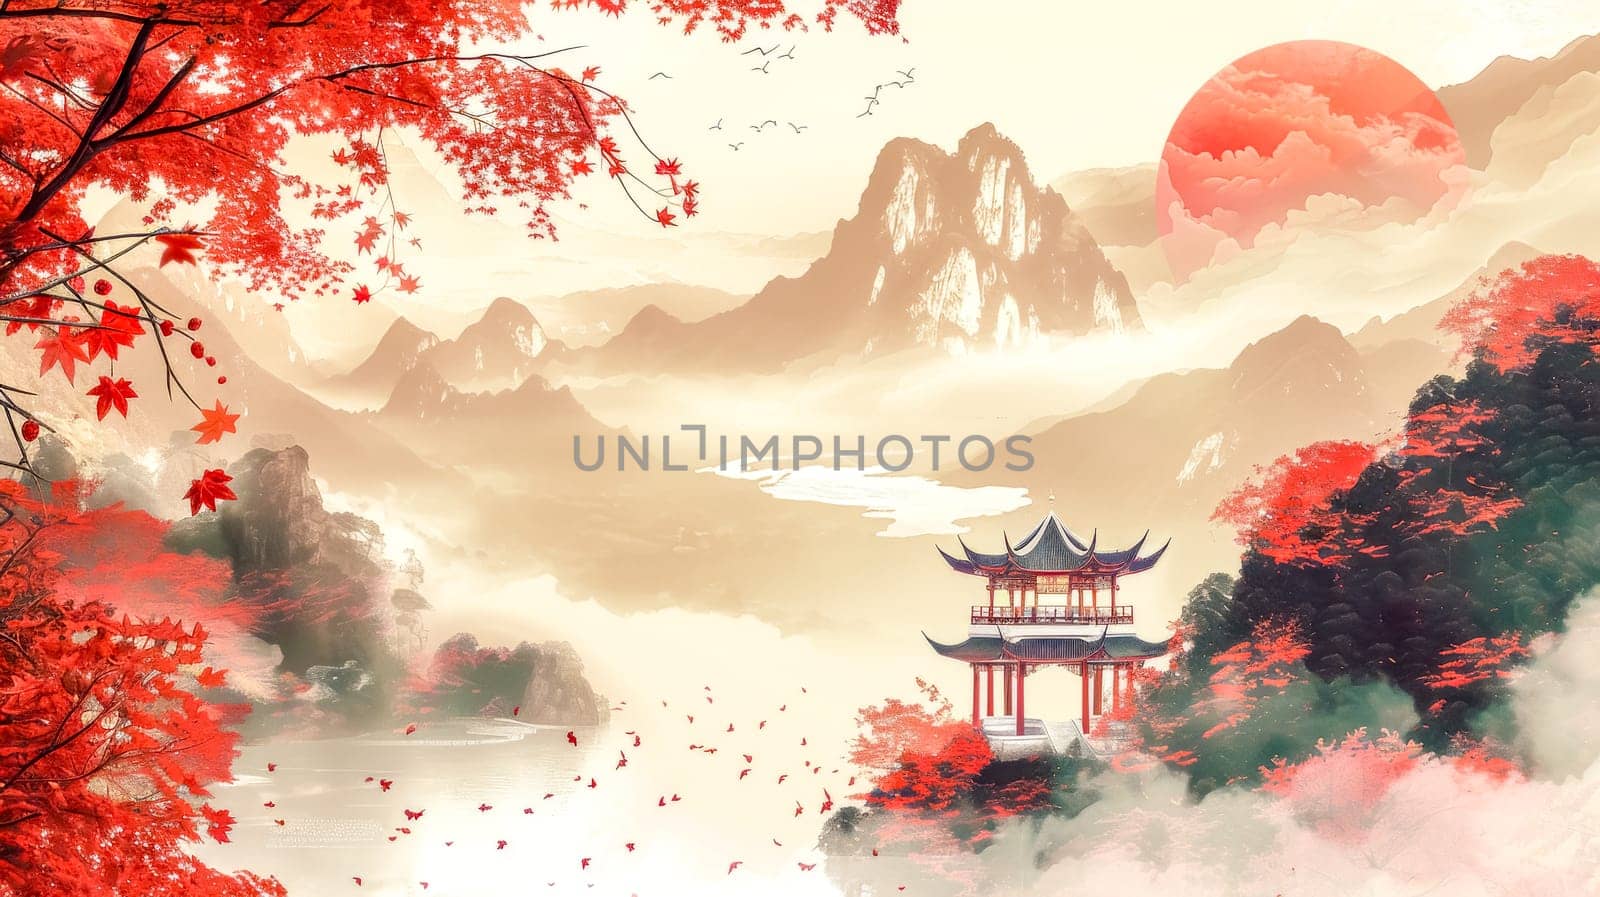 Tranquil scene depicting a traditional asian pavilion amidst mountains with autumn trees